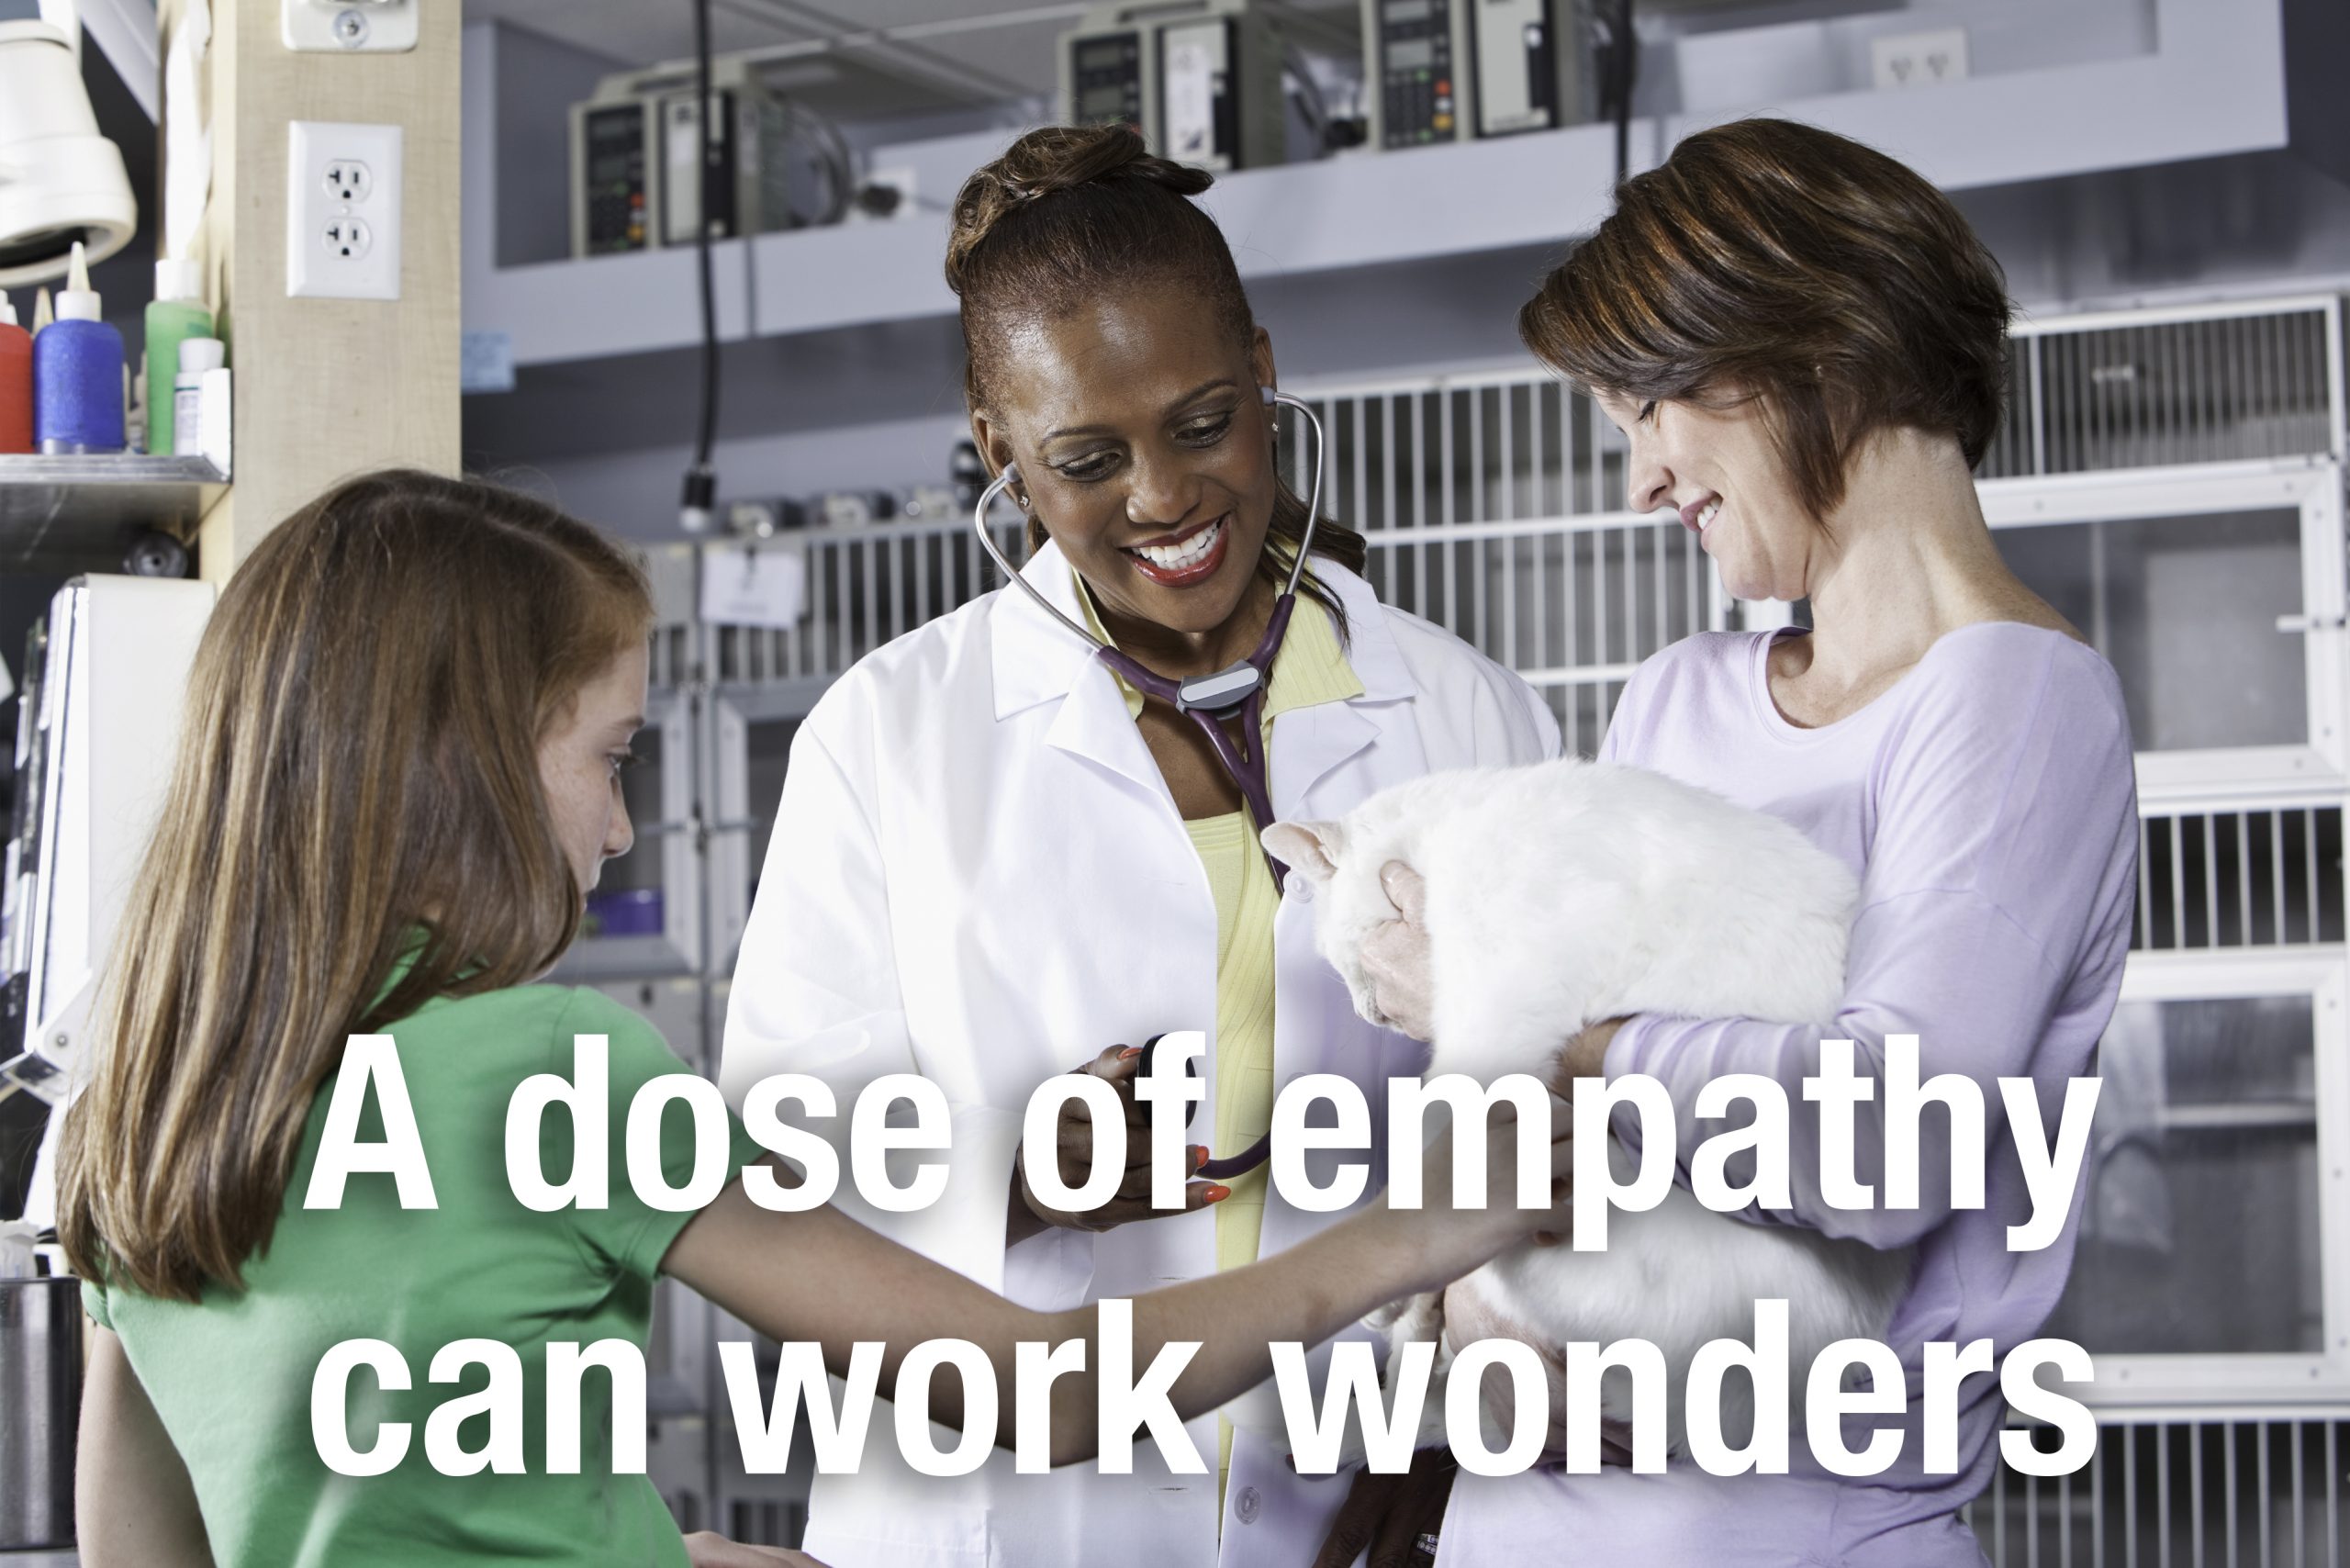 A dose of empathy can work wonders